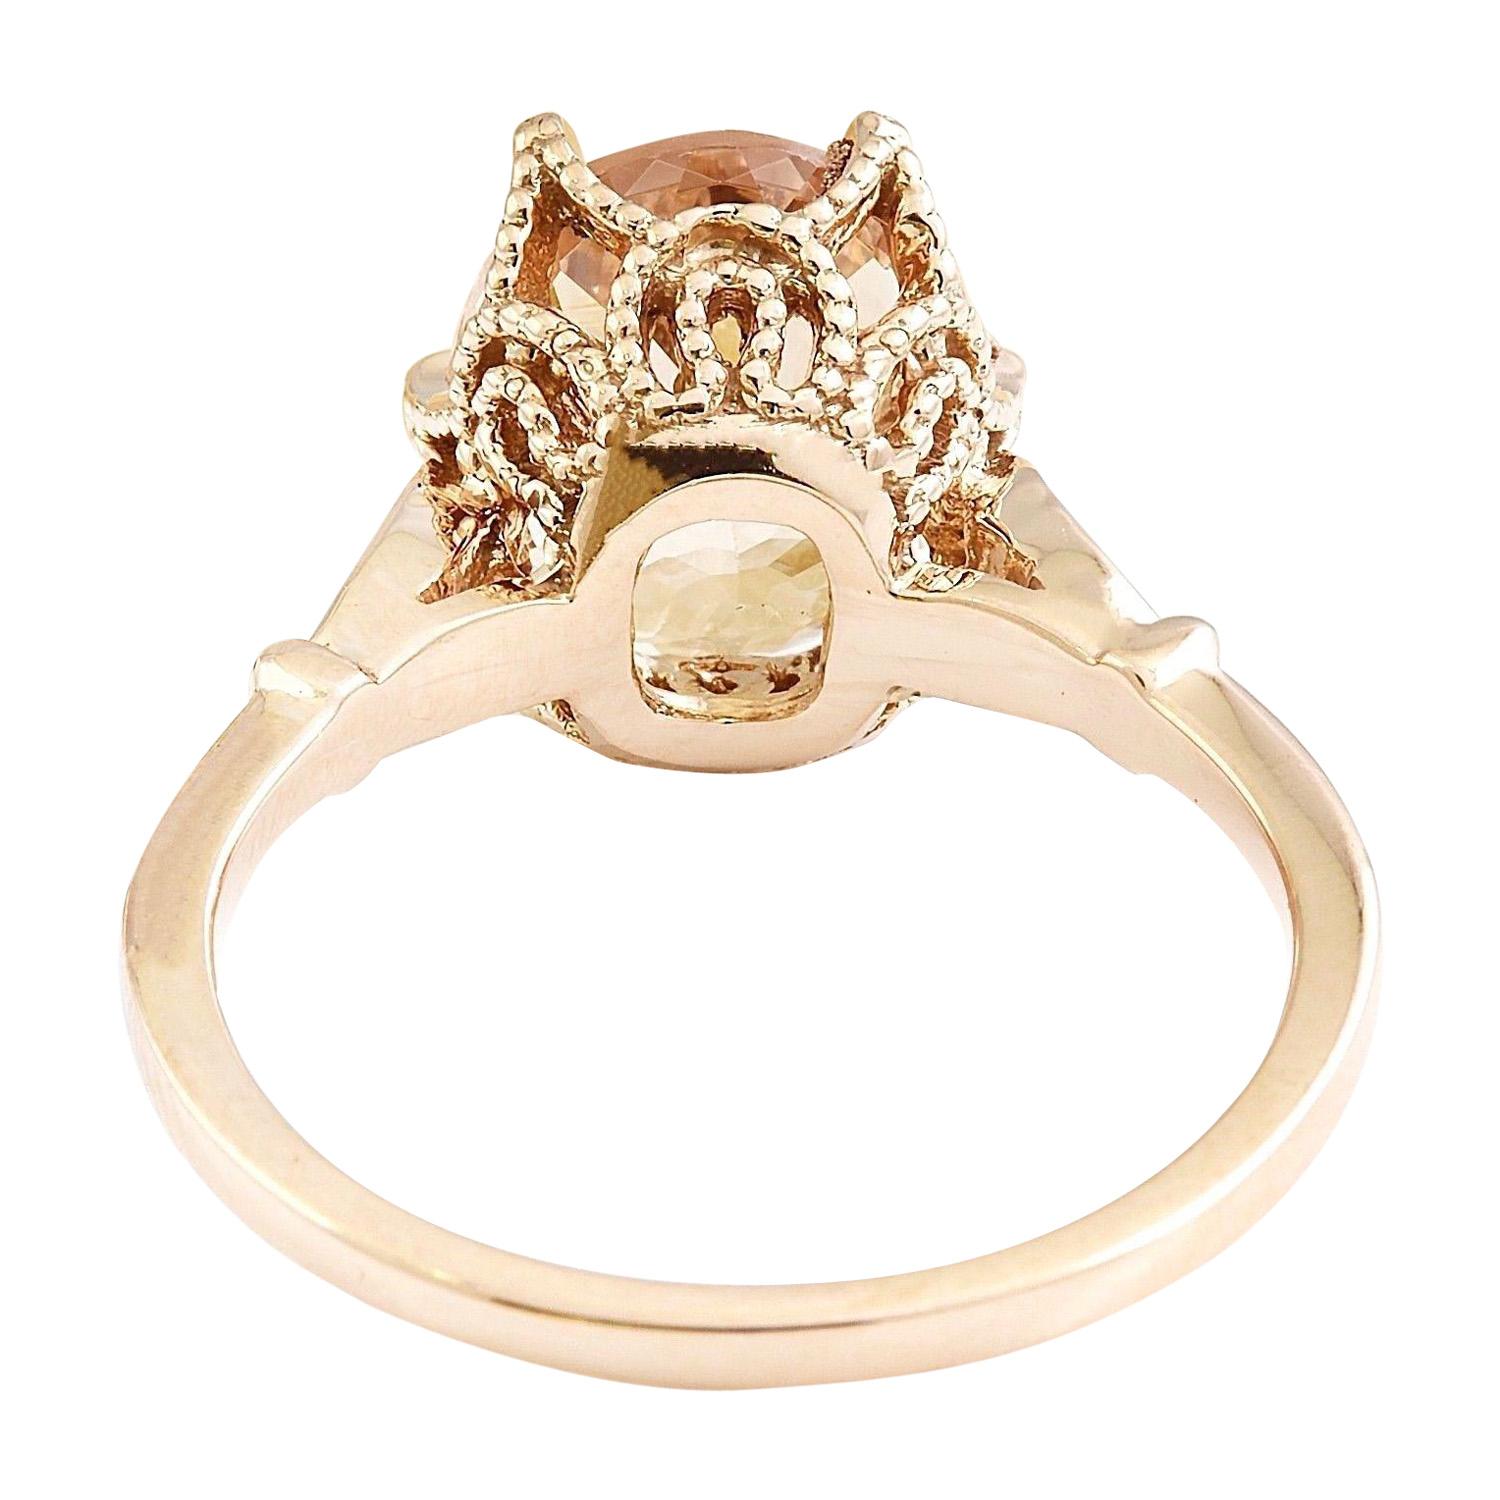 Oval Cut Exquisite Natural Morganite Diamond Ring In 14 Karat Solid Rose Gold  For Sale